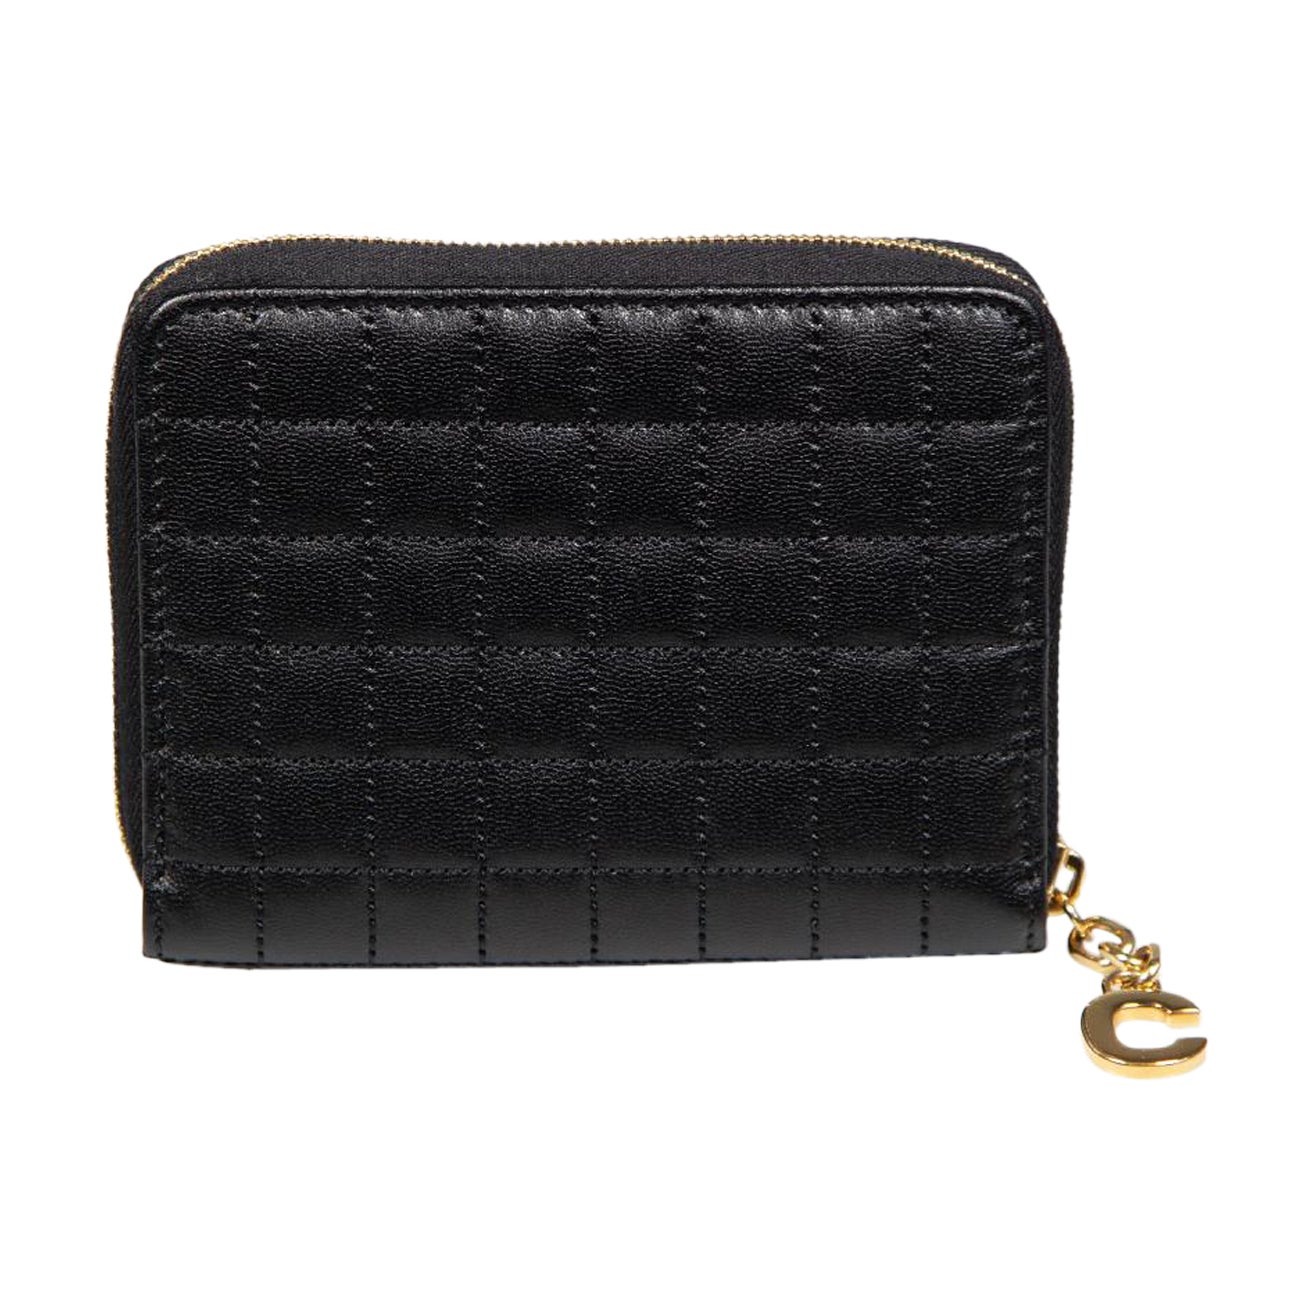 Céline Black Leather C Charm Quilted Wallet For Sale